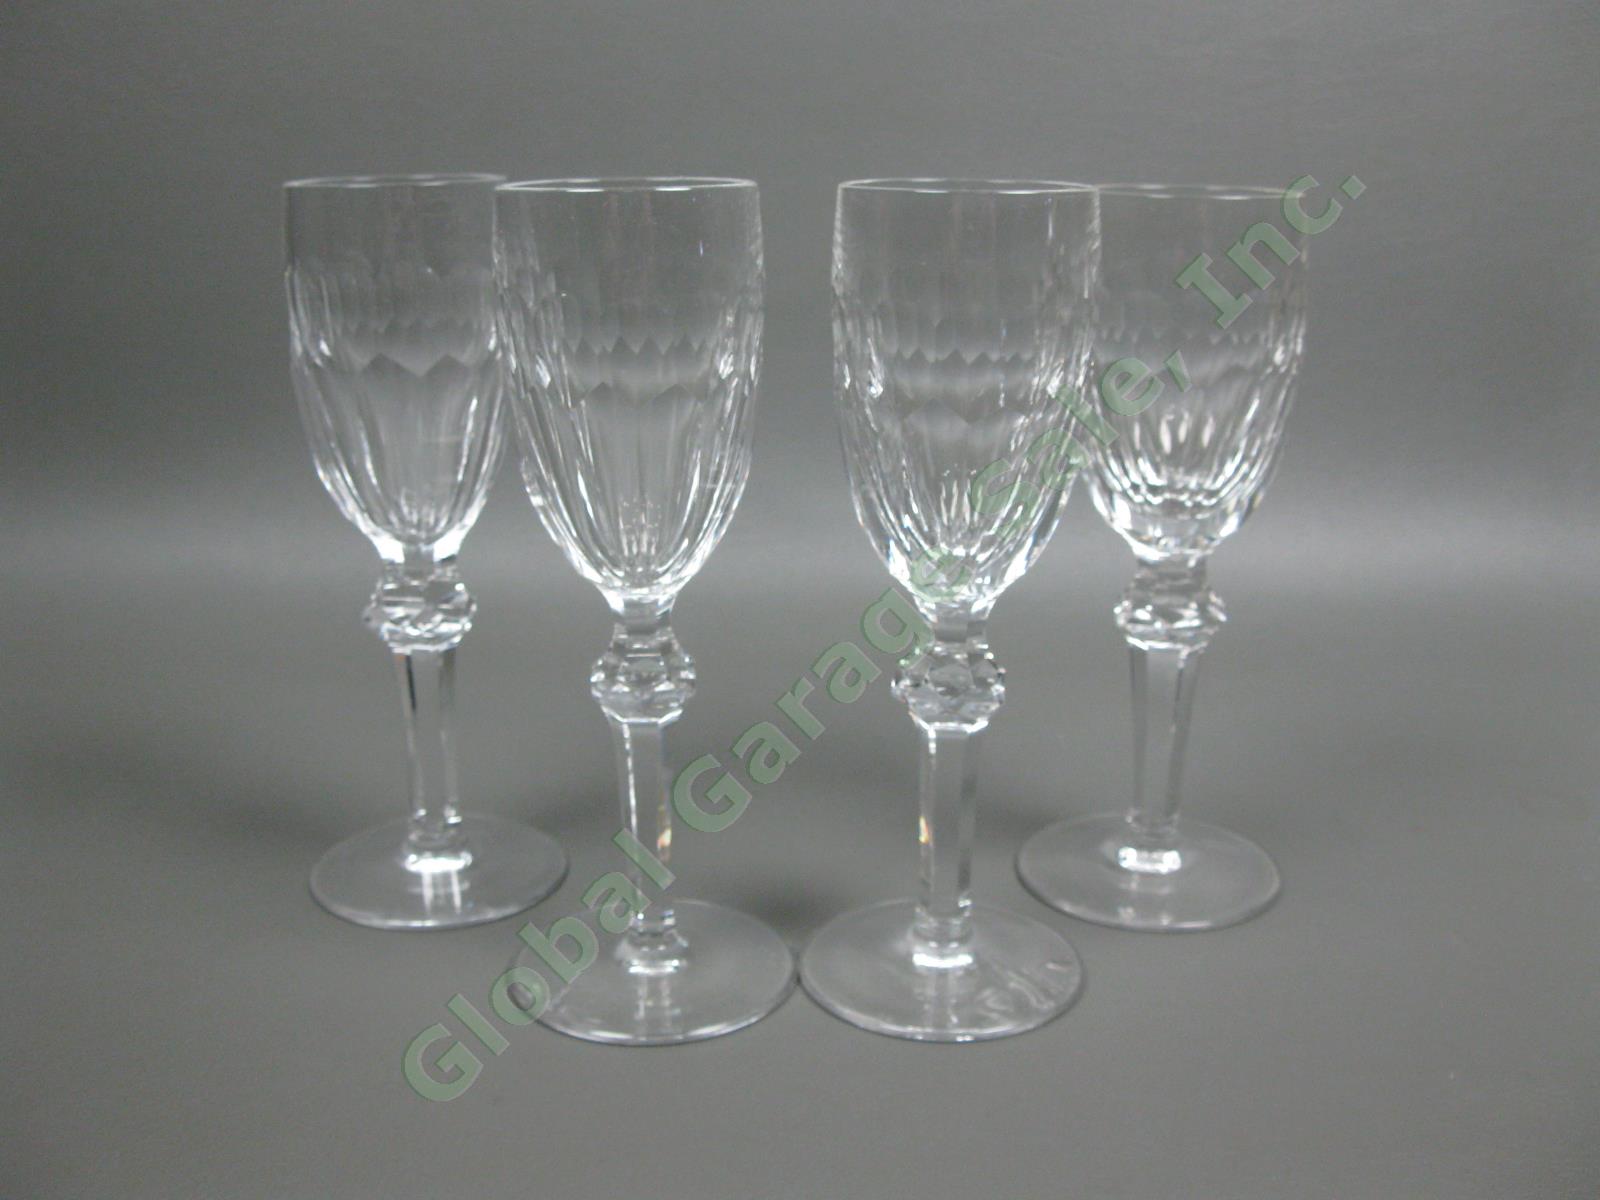 6 Waterford Crystal Curraghmore Sherry Wine Glasses Ireland Blown Cut Glass Set